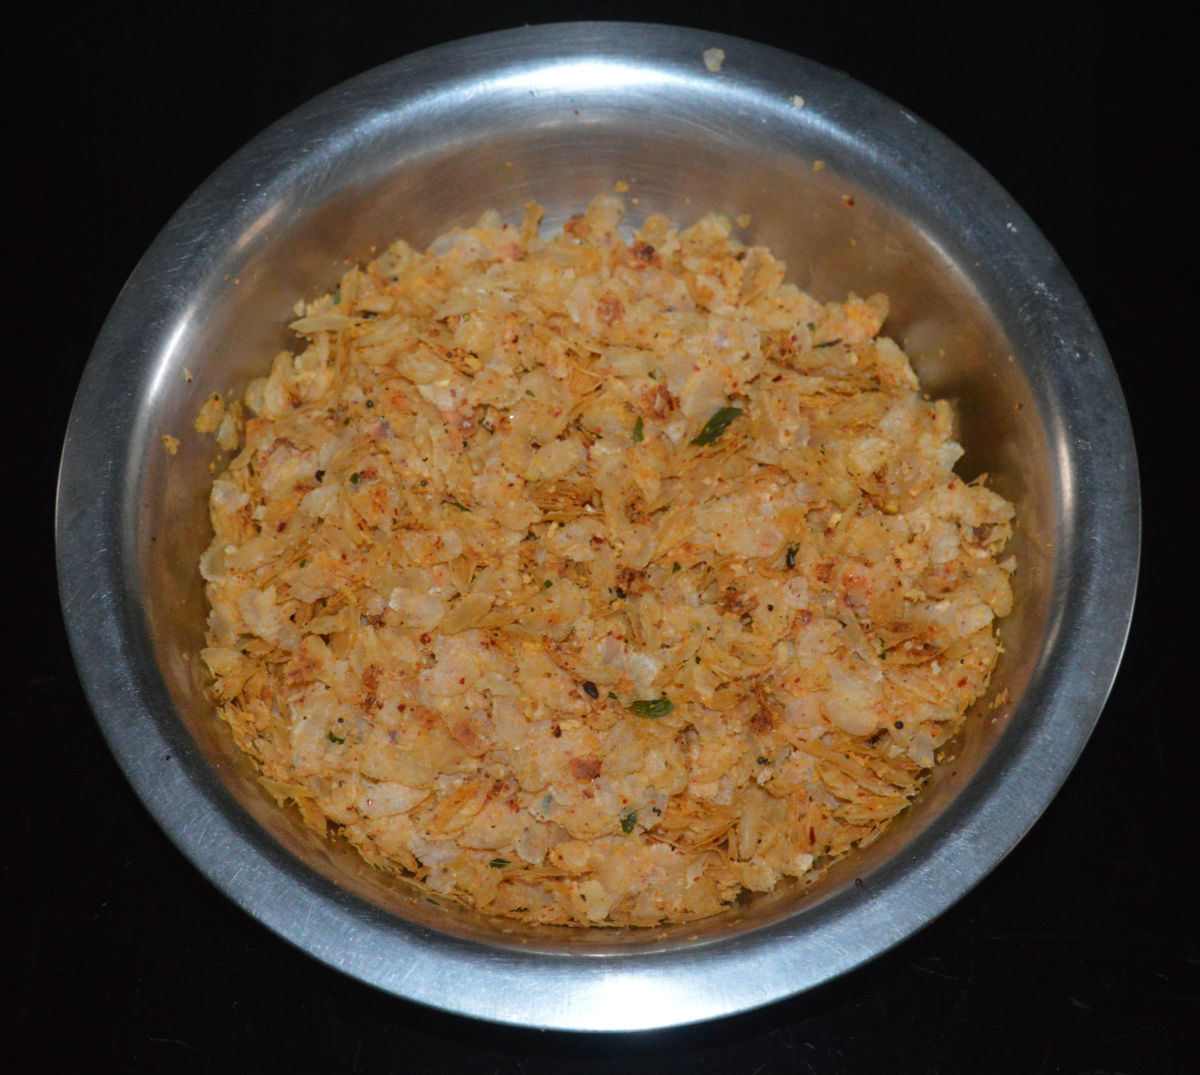 Step four: Gently mix so that the flattened rice gets nicely coated with the masala paste and the tempering. Check for taste and add more salt if needed.